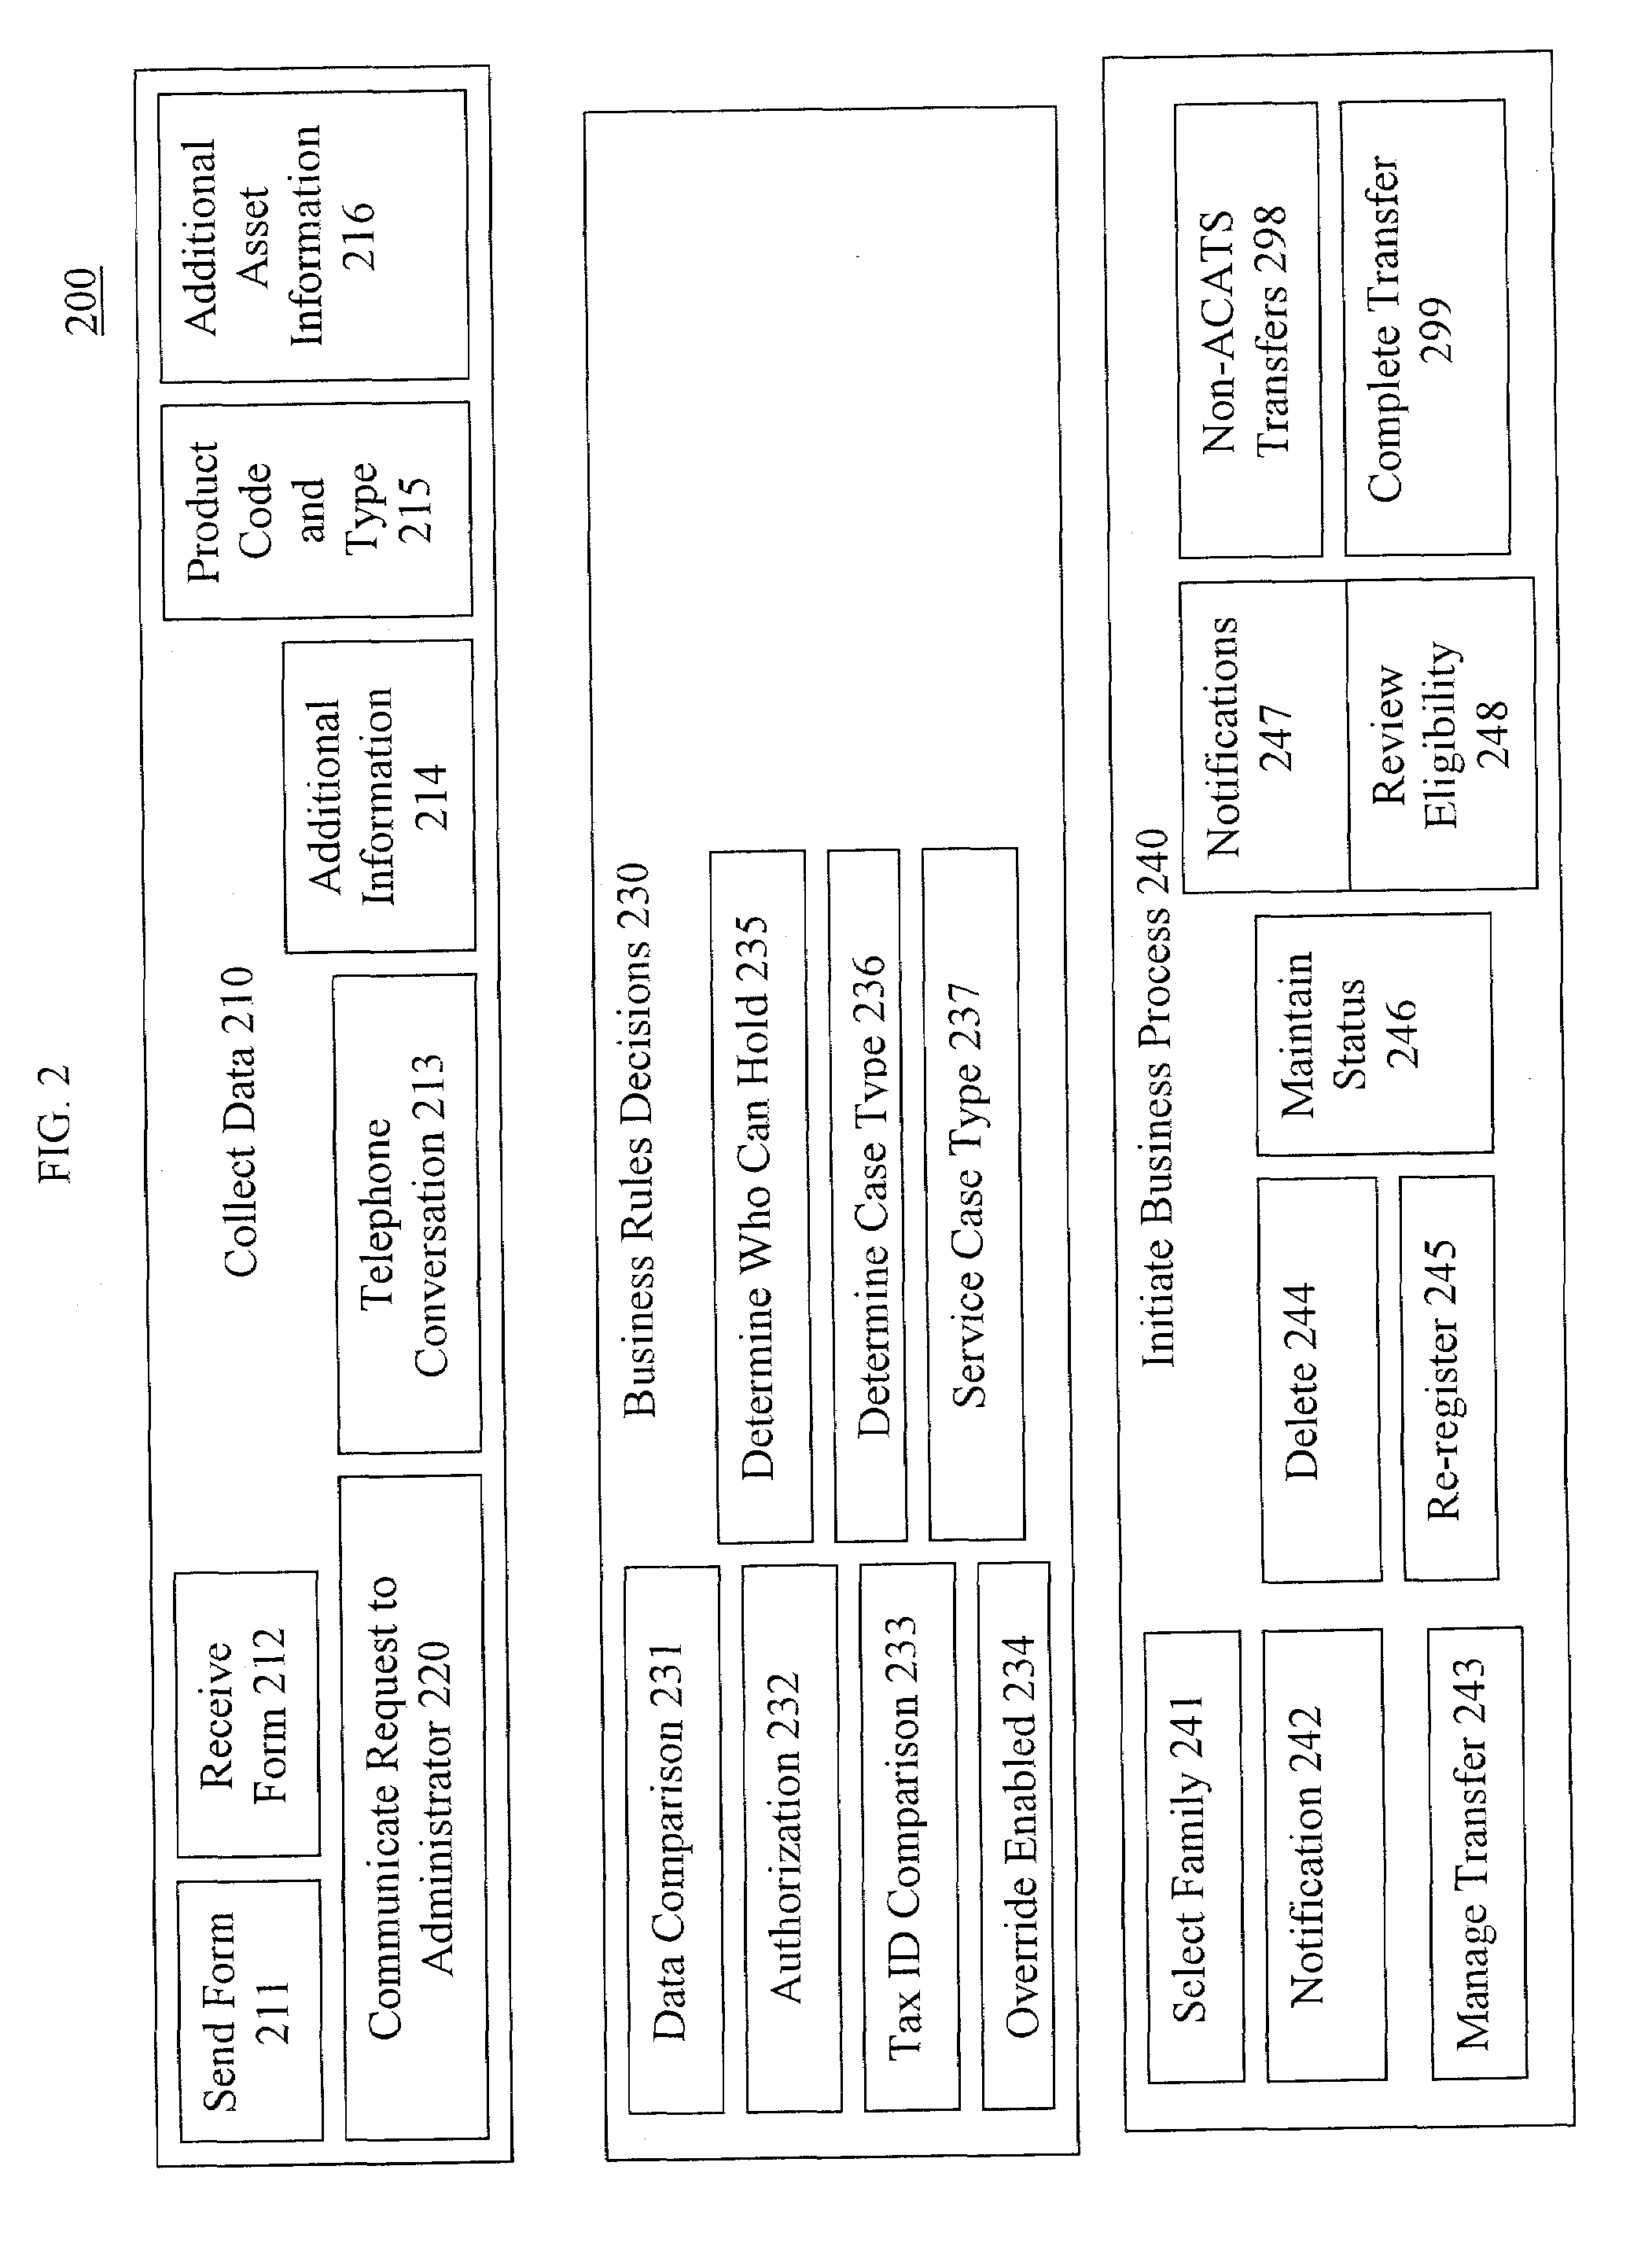 System and method for facilitating investment account transfers